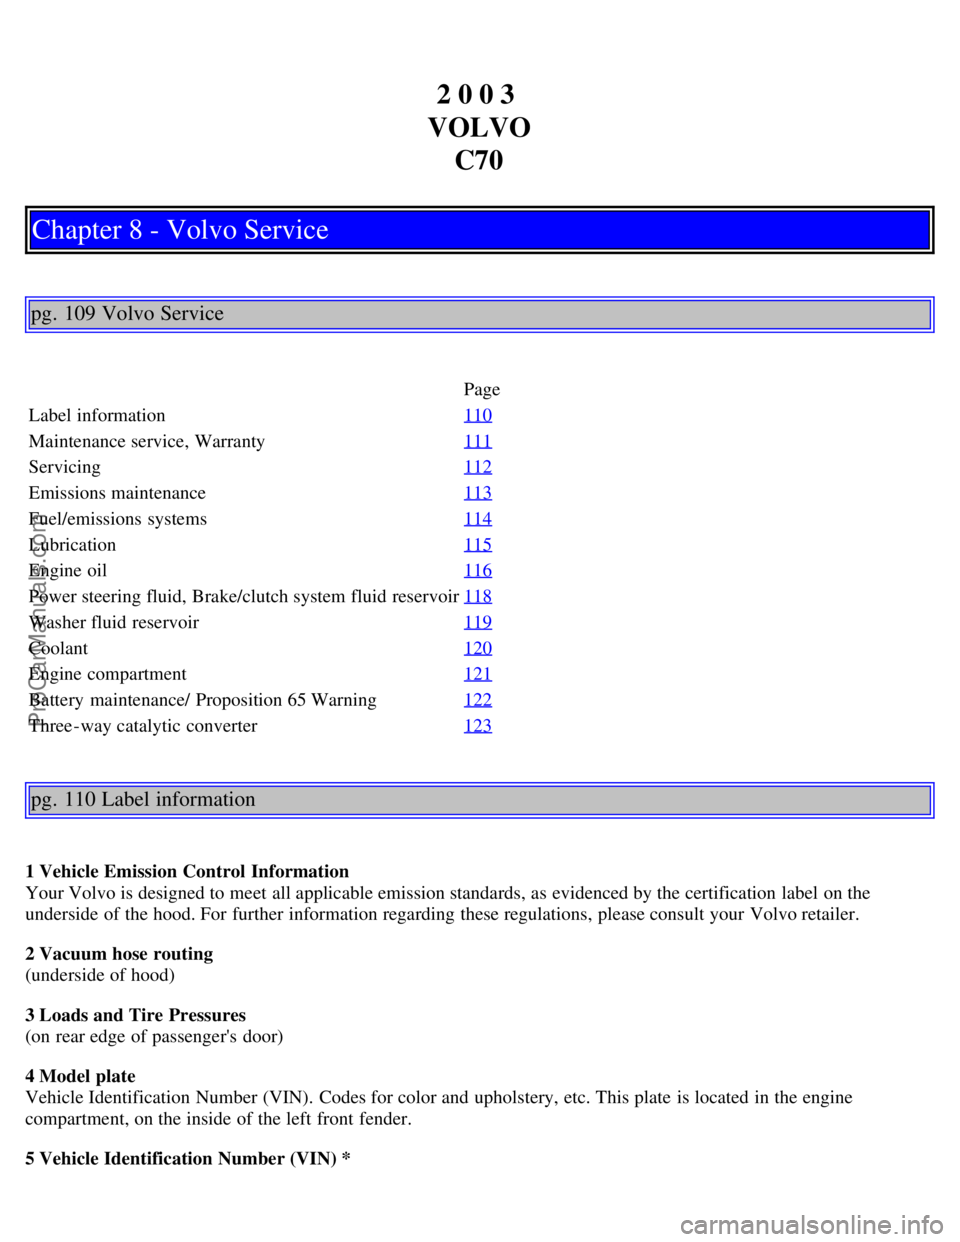 VOLVO C70 2003  Owners Manual 2 0 0 3 
VOLVO C70
Chapter 8 - Volvo Service
pg. 109 Volvo Service
Page
Label information 110
Maintenance service, Warranty111
Servicing112
Emissions maintenance113
Fuel/emissions  systems114
Lubricat